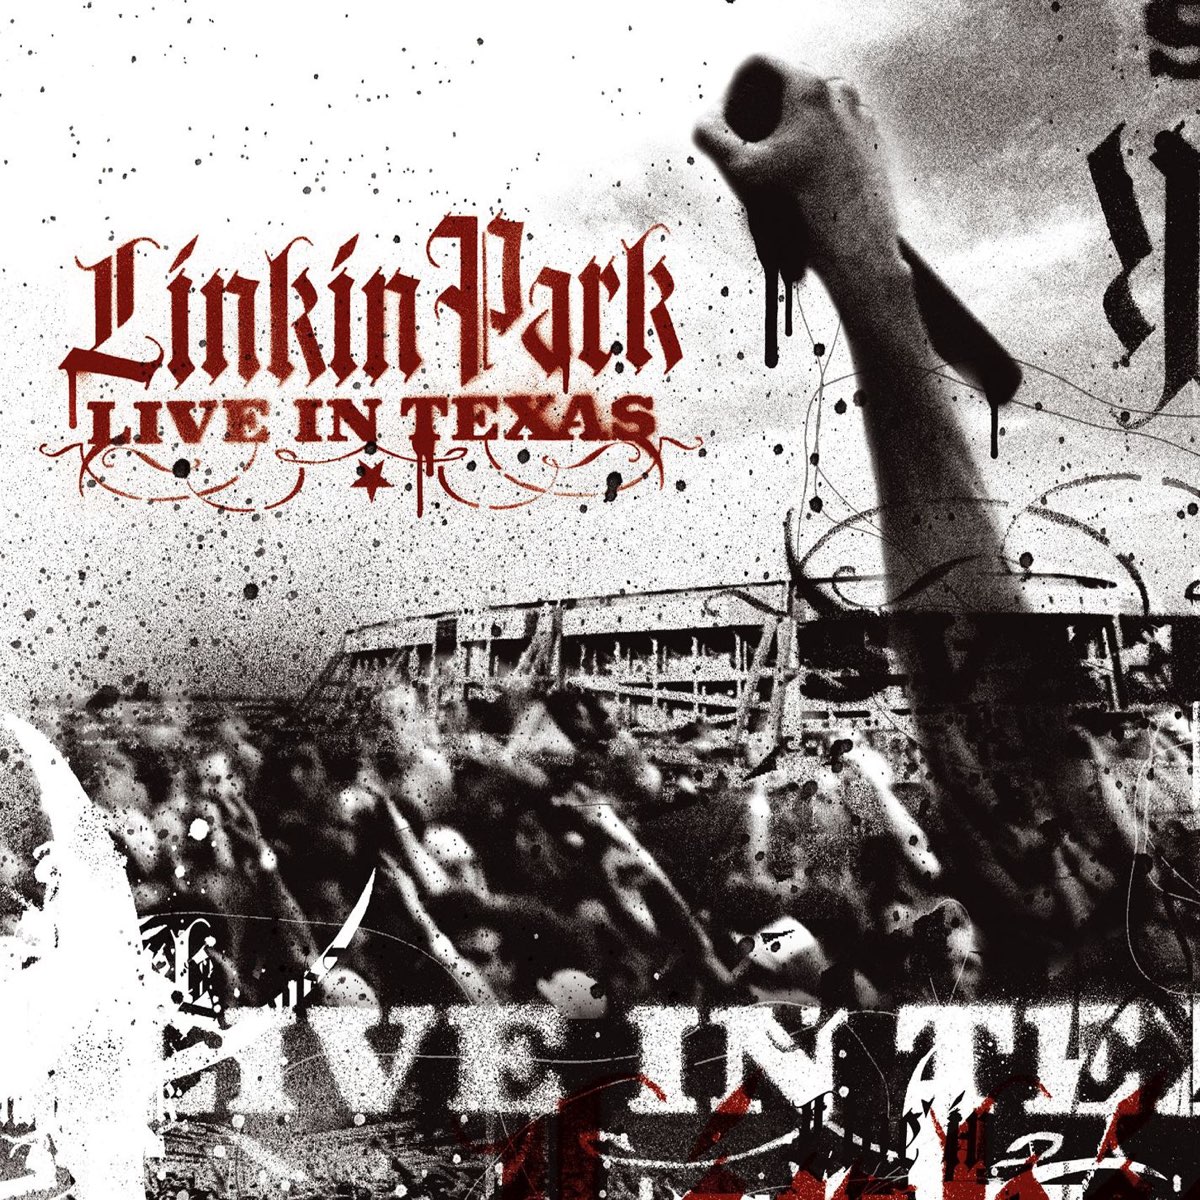 Linkin Park - Live In Texas - LP Colored Vinyl - Ear Candy Music